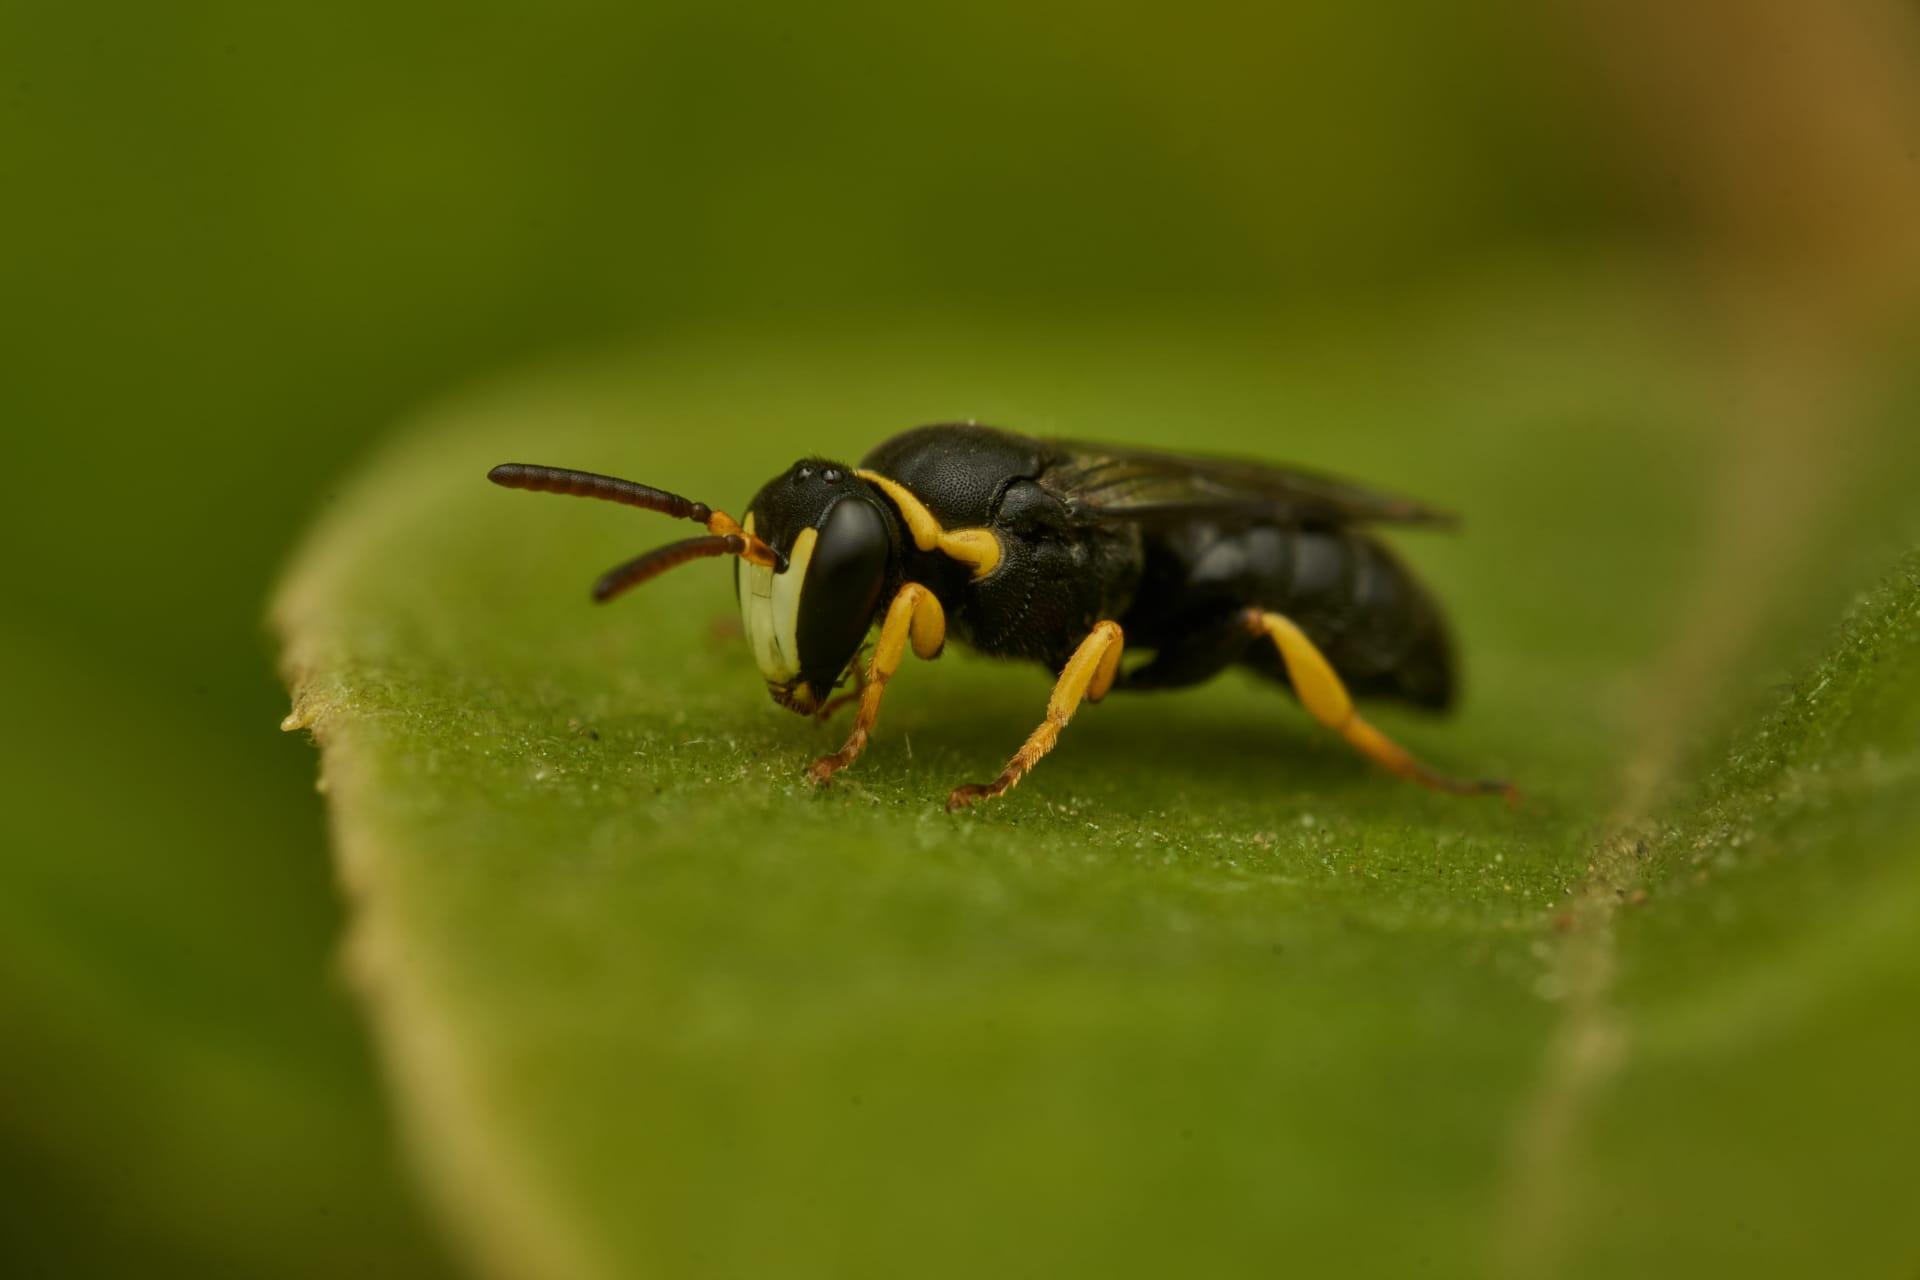 Black wasp pictures